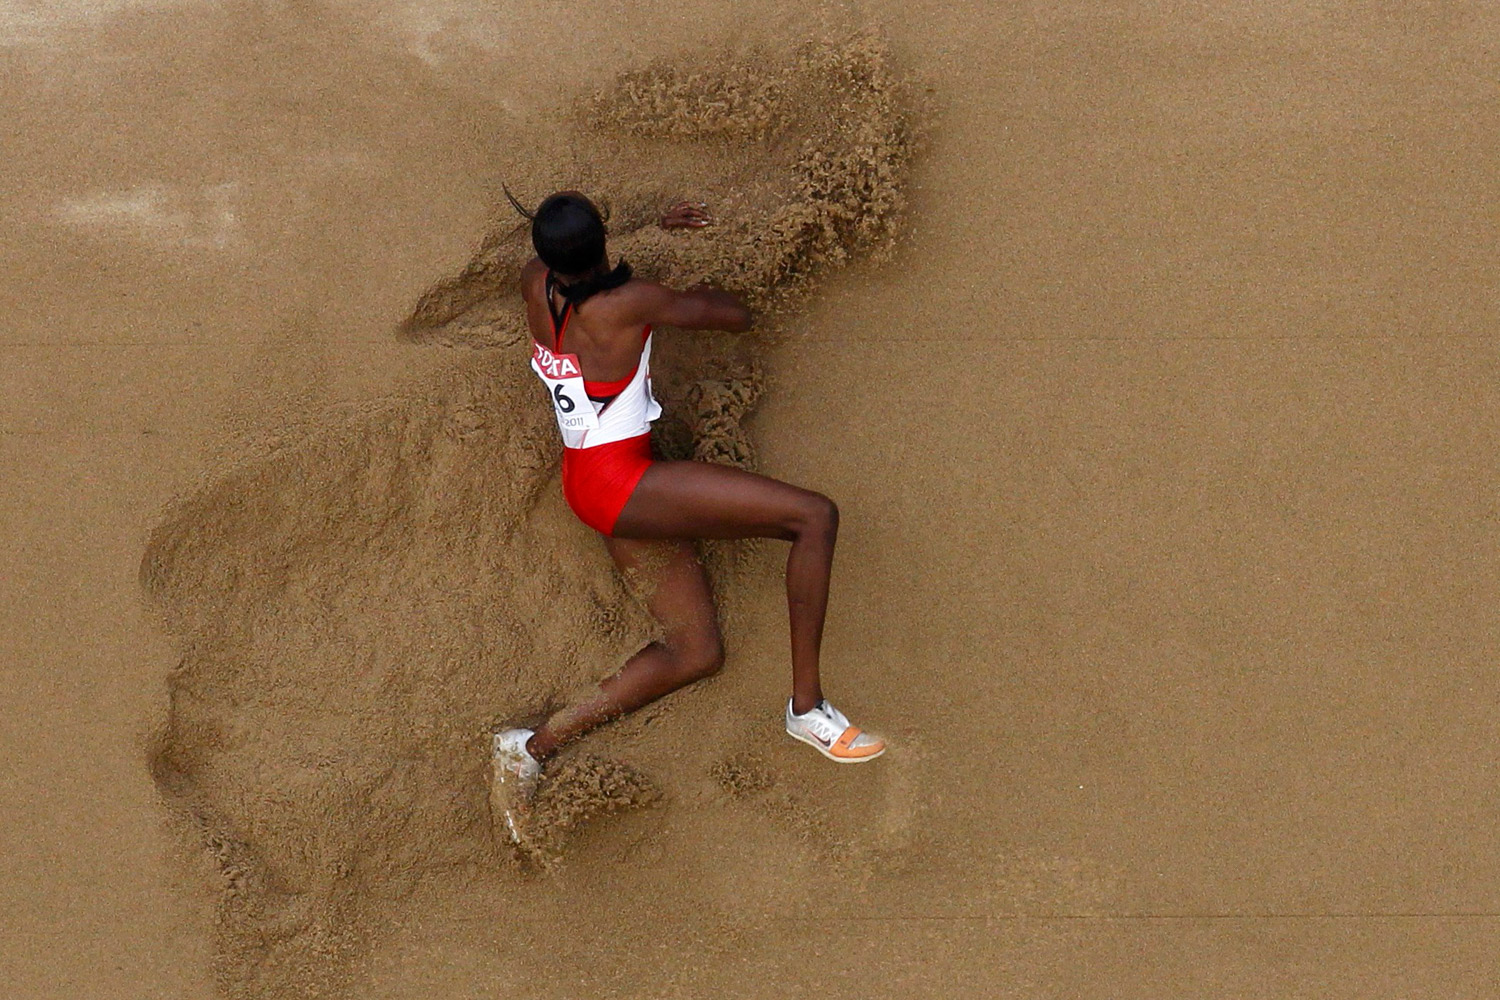 Ruky Abdulai of Canada competes during the long jump event of the heptathlon at the IAAF World Championships in Daegu, South Korea, August 30, 2011.